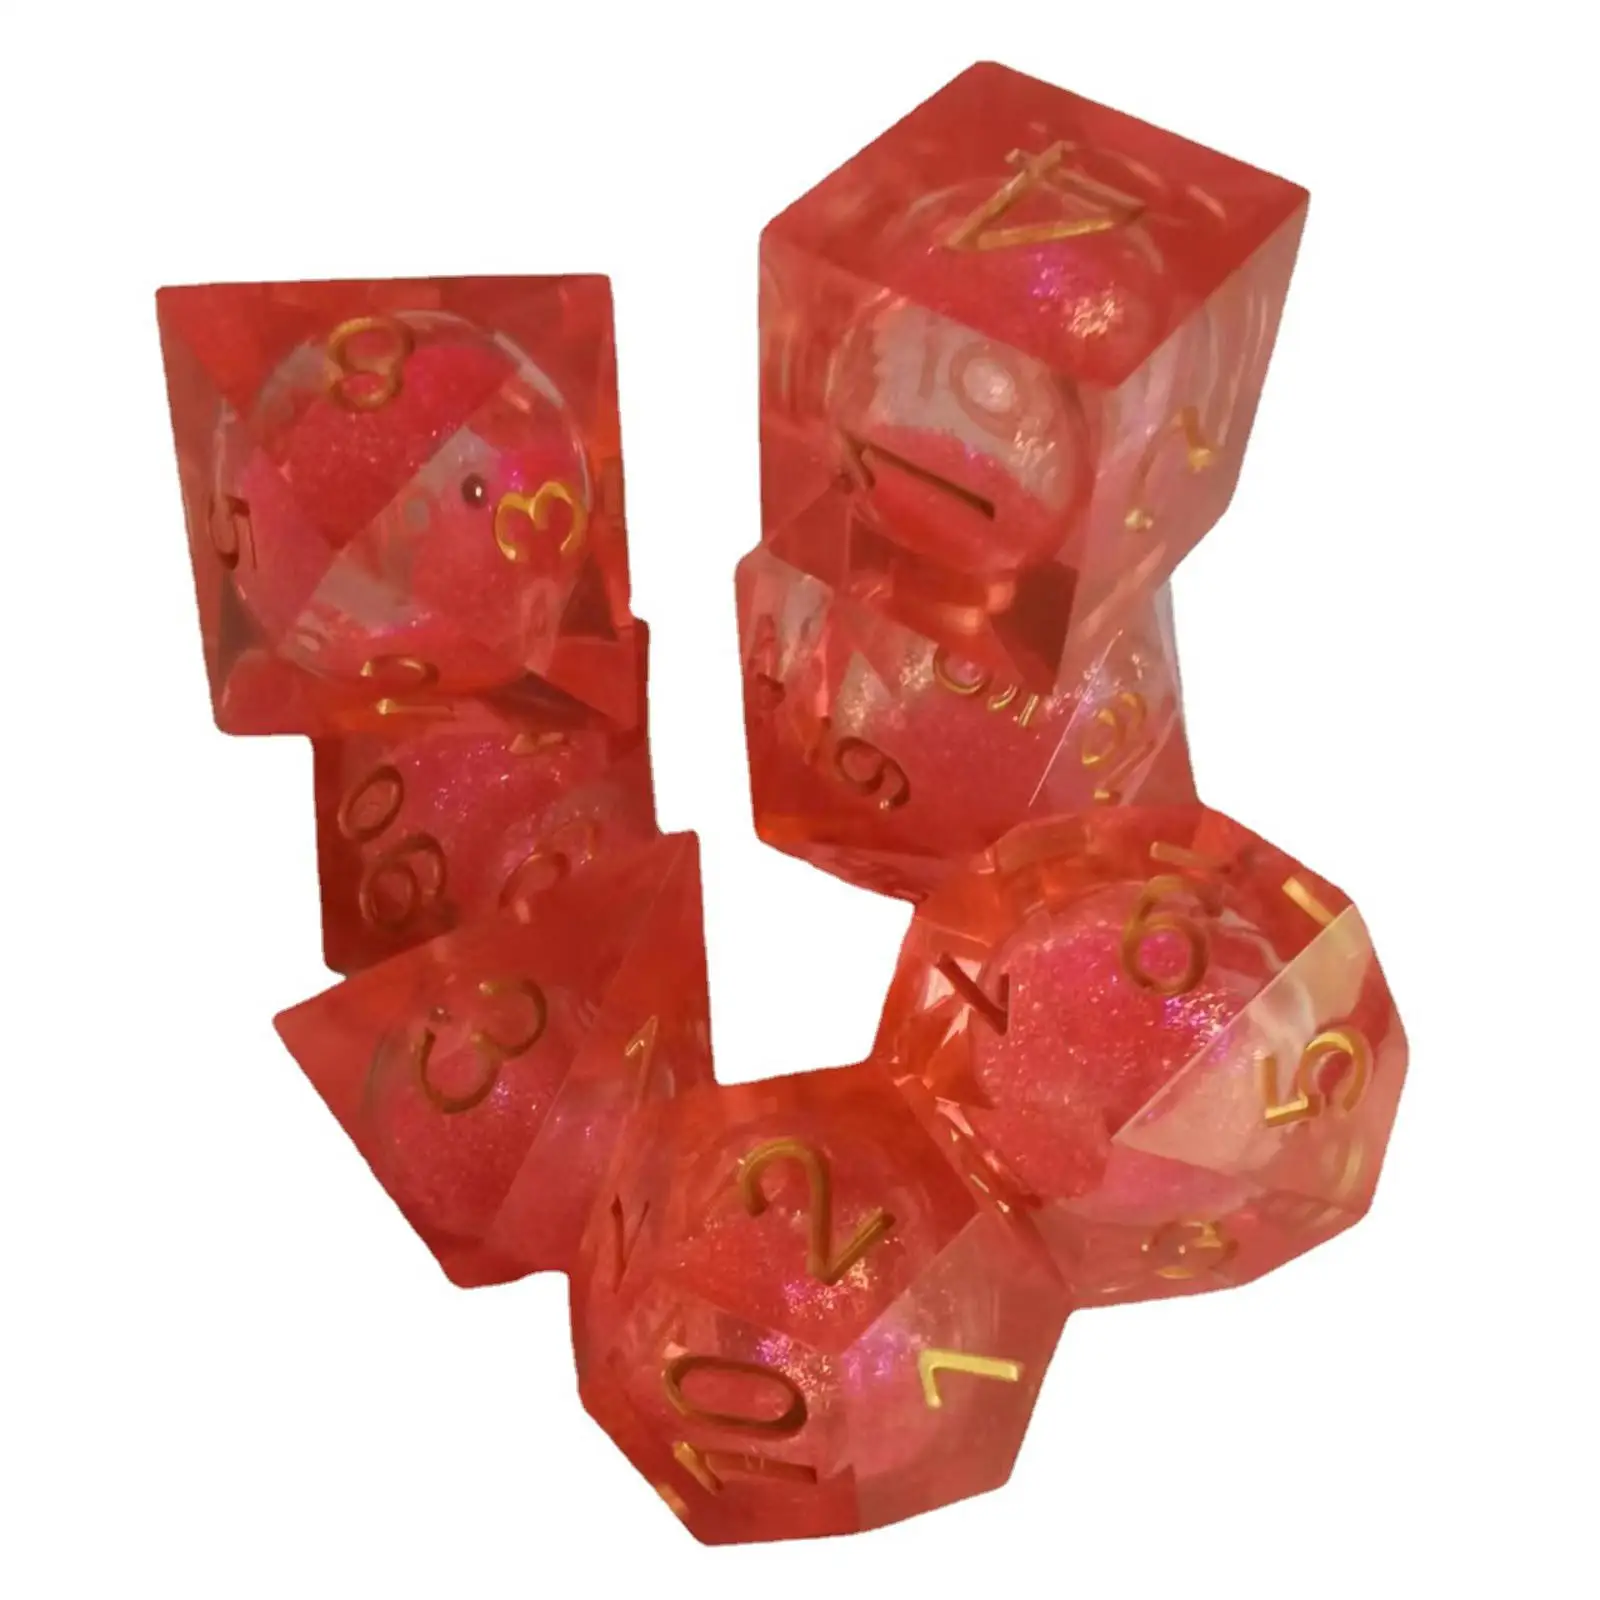 7x Dice Set Resin Math Counting Teaching Aids Party Game Dices Multi Sided Game Dices for Bar Party KTV Board Game Table Game